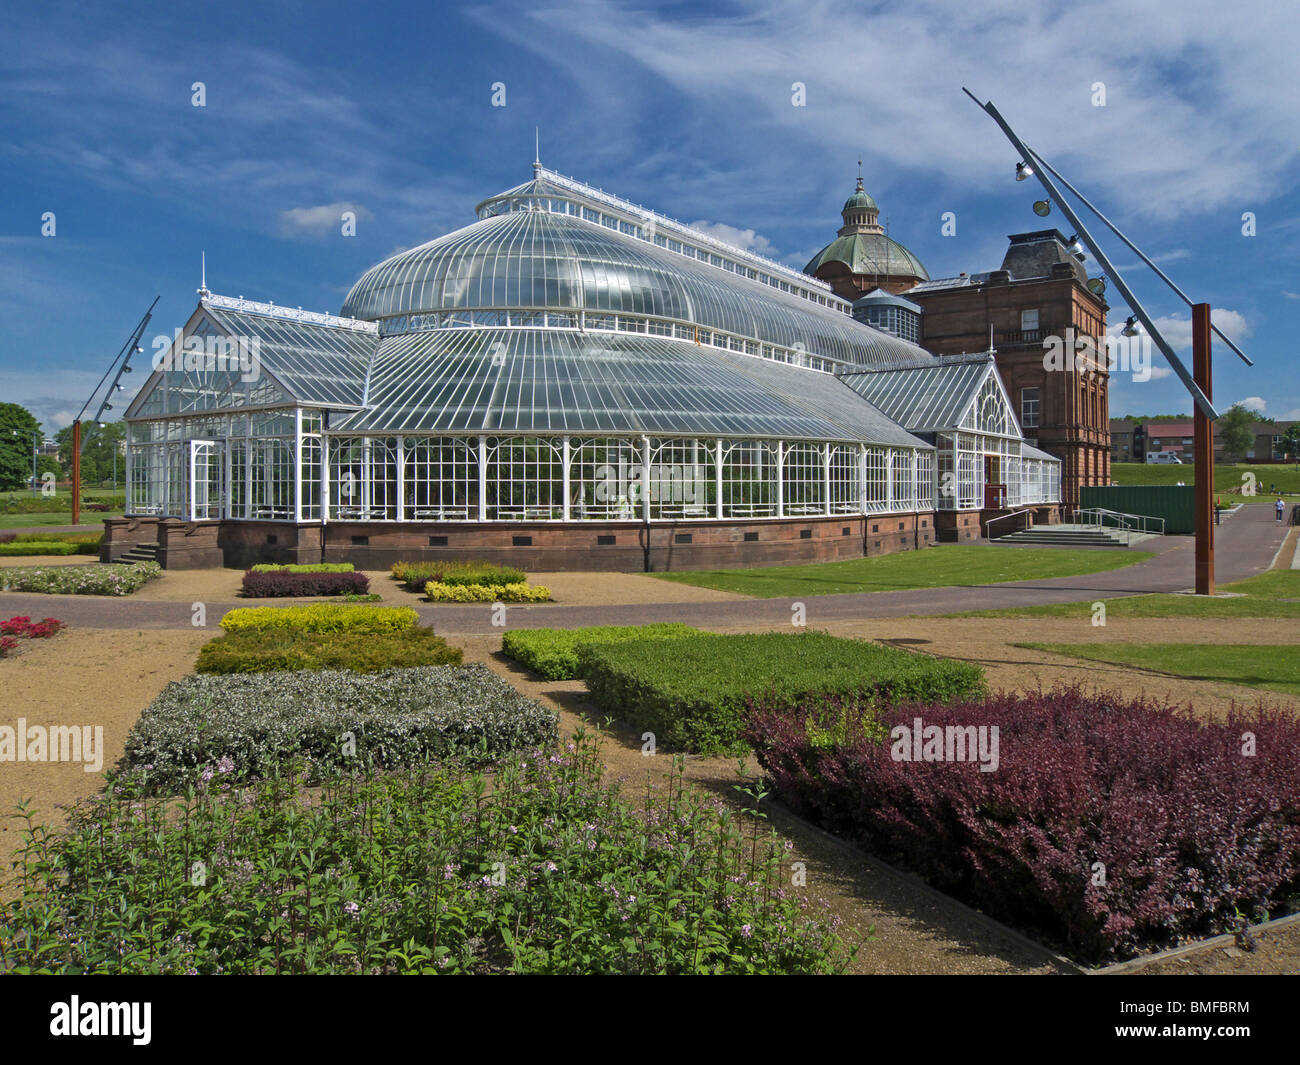 People's Palace and Winter Gardens in Glasgow Green park Glasgow Scotland Stock Photo